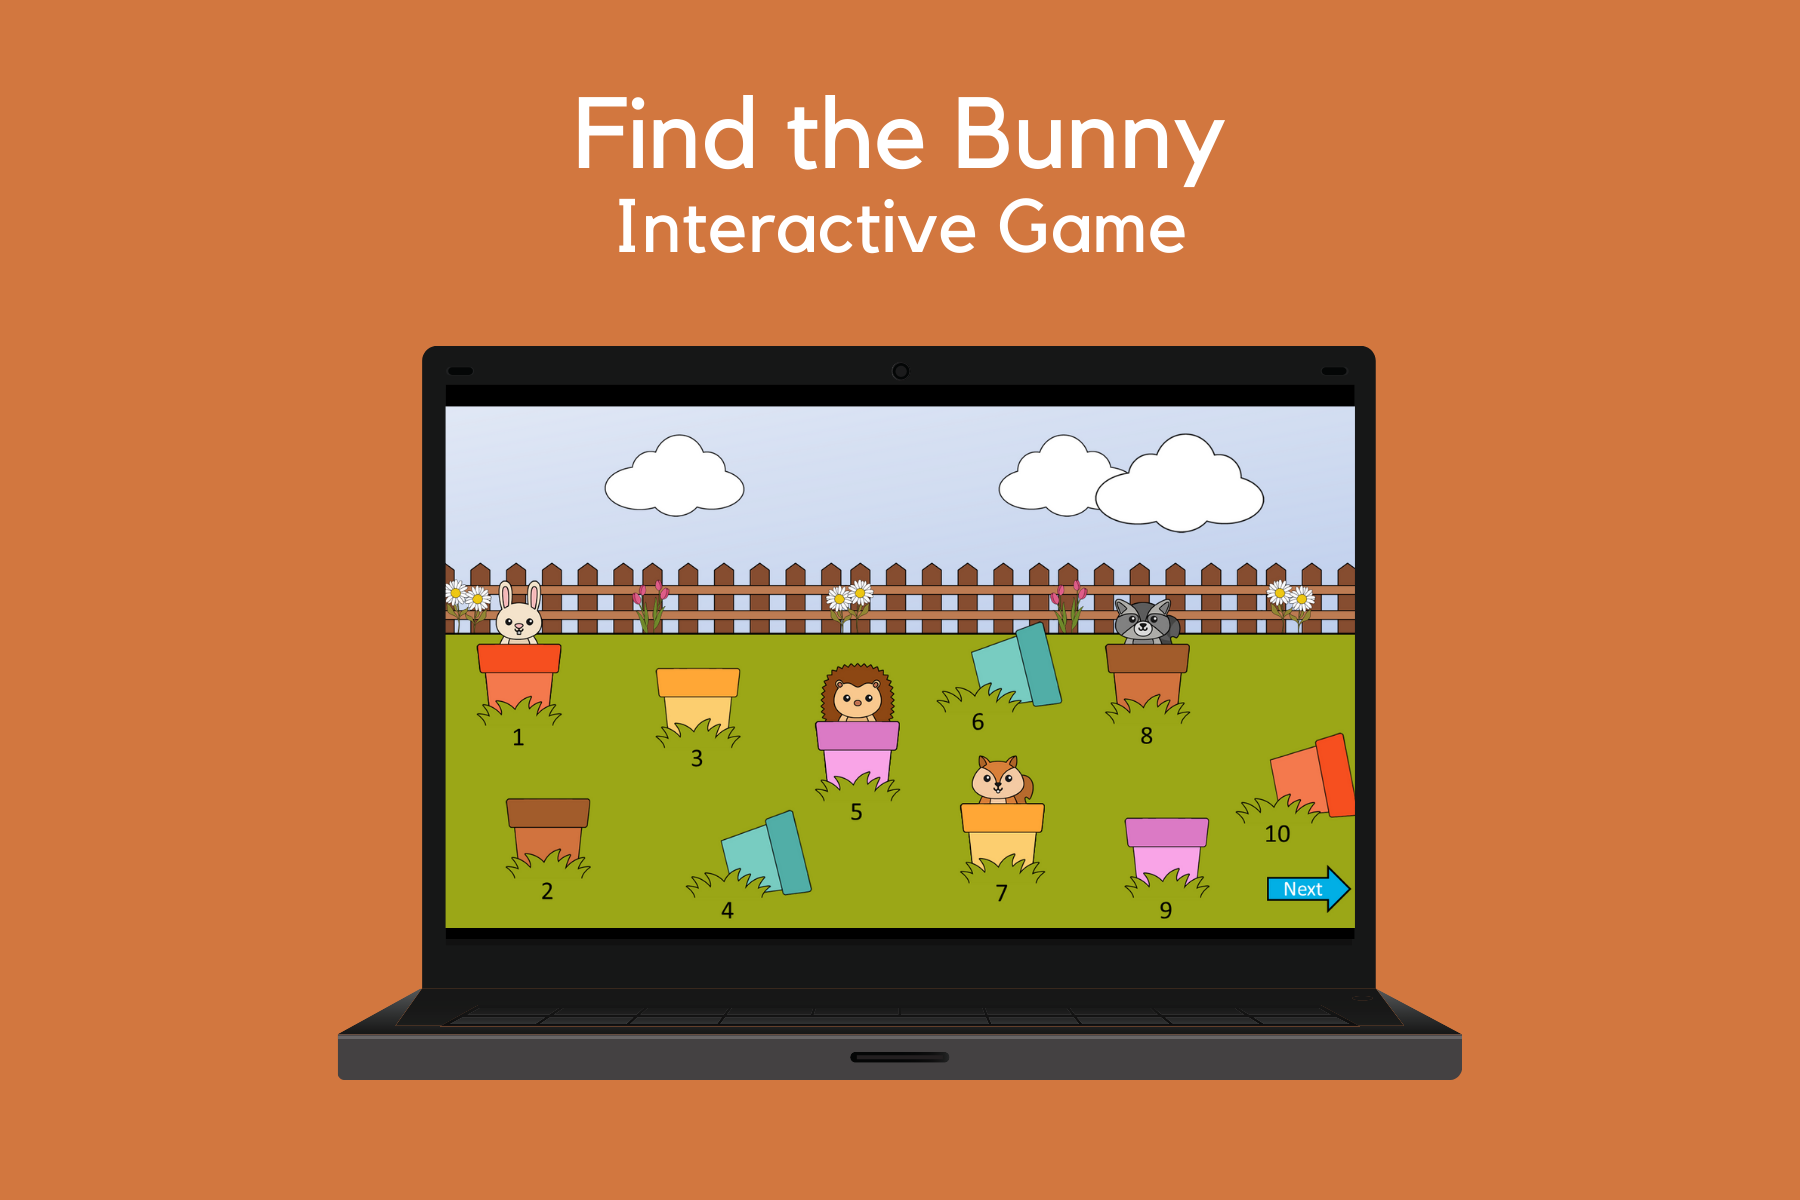 Find the Bunny Interactive Game